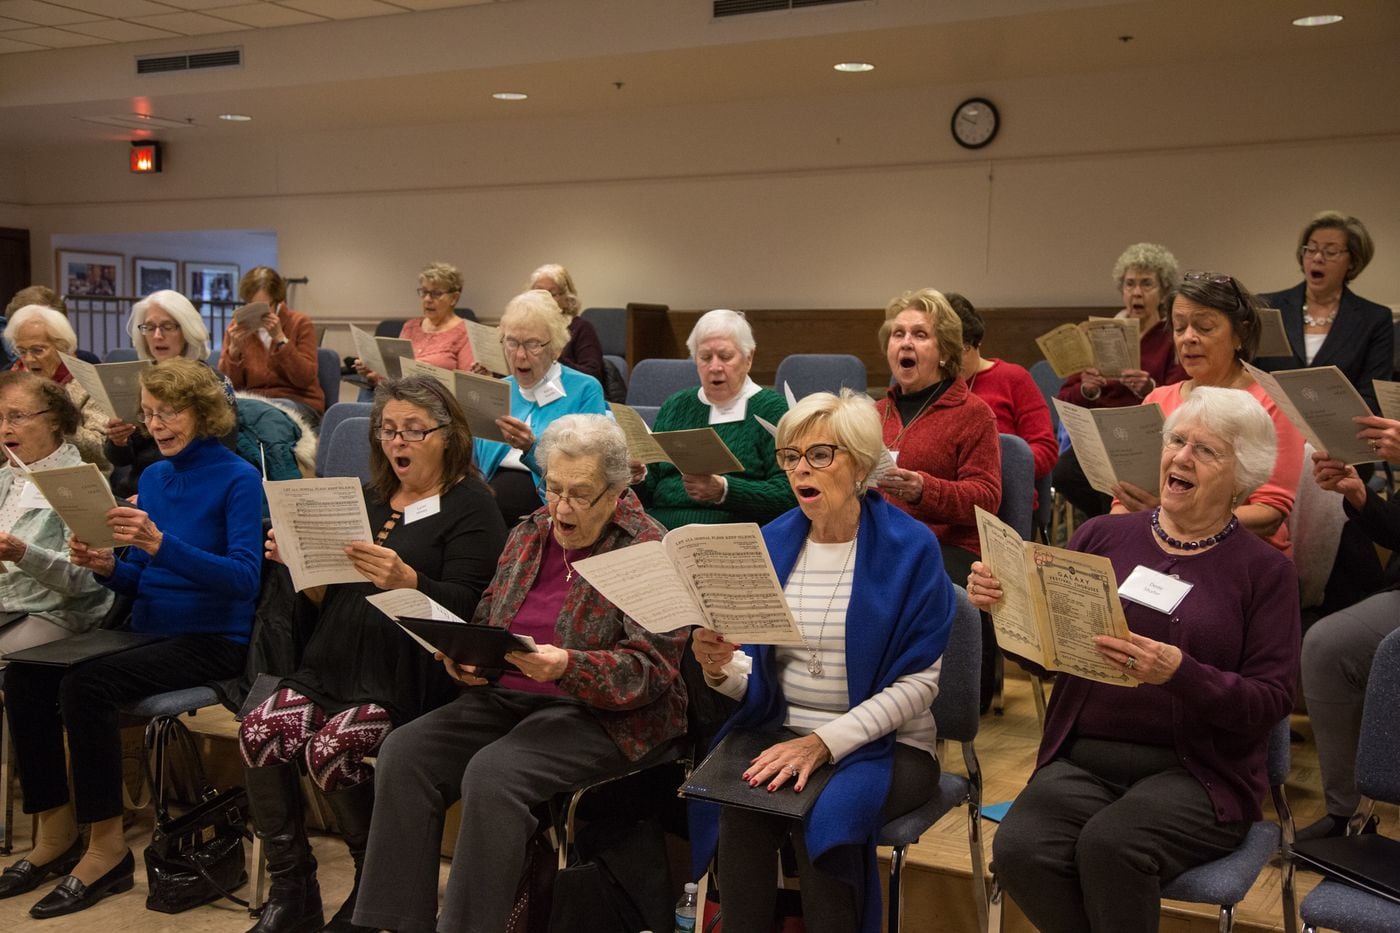 The members of the Singing for Life choir join together for their weekly choral practice at Bryn Mawr Presbyterian Church. EMILY COHEN / For the Inquirer